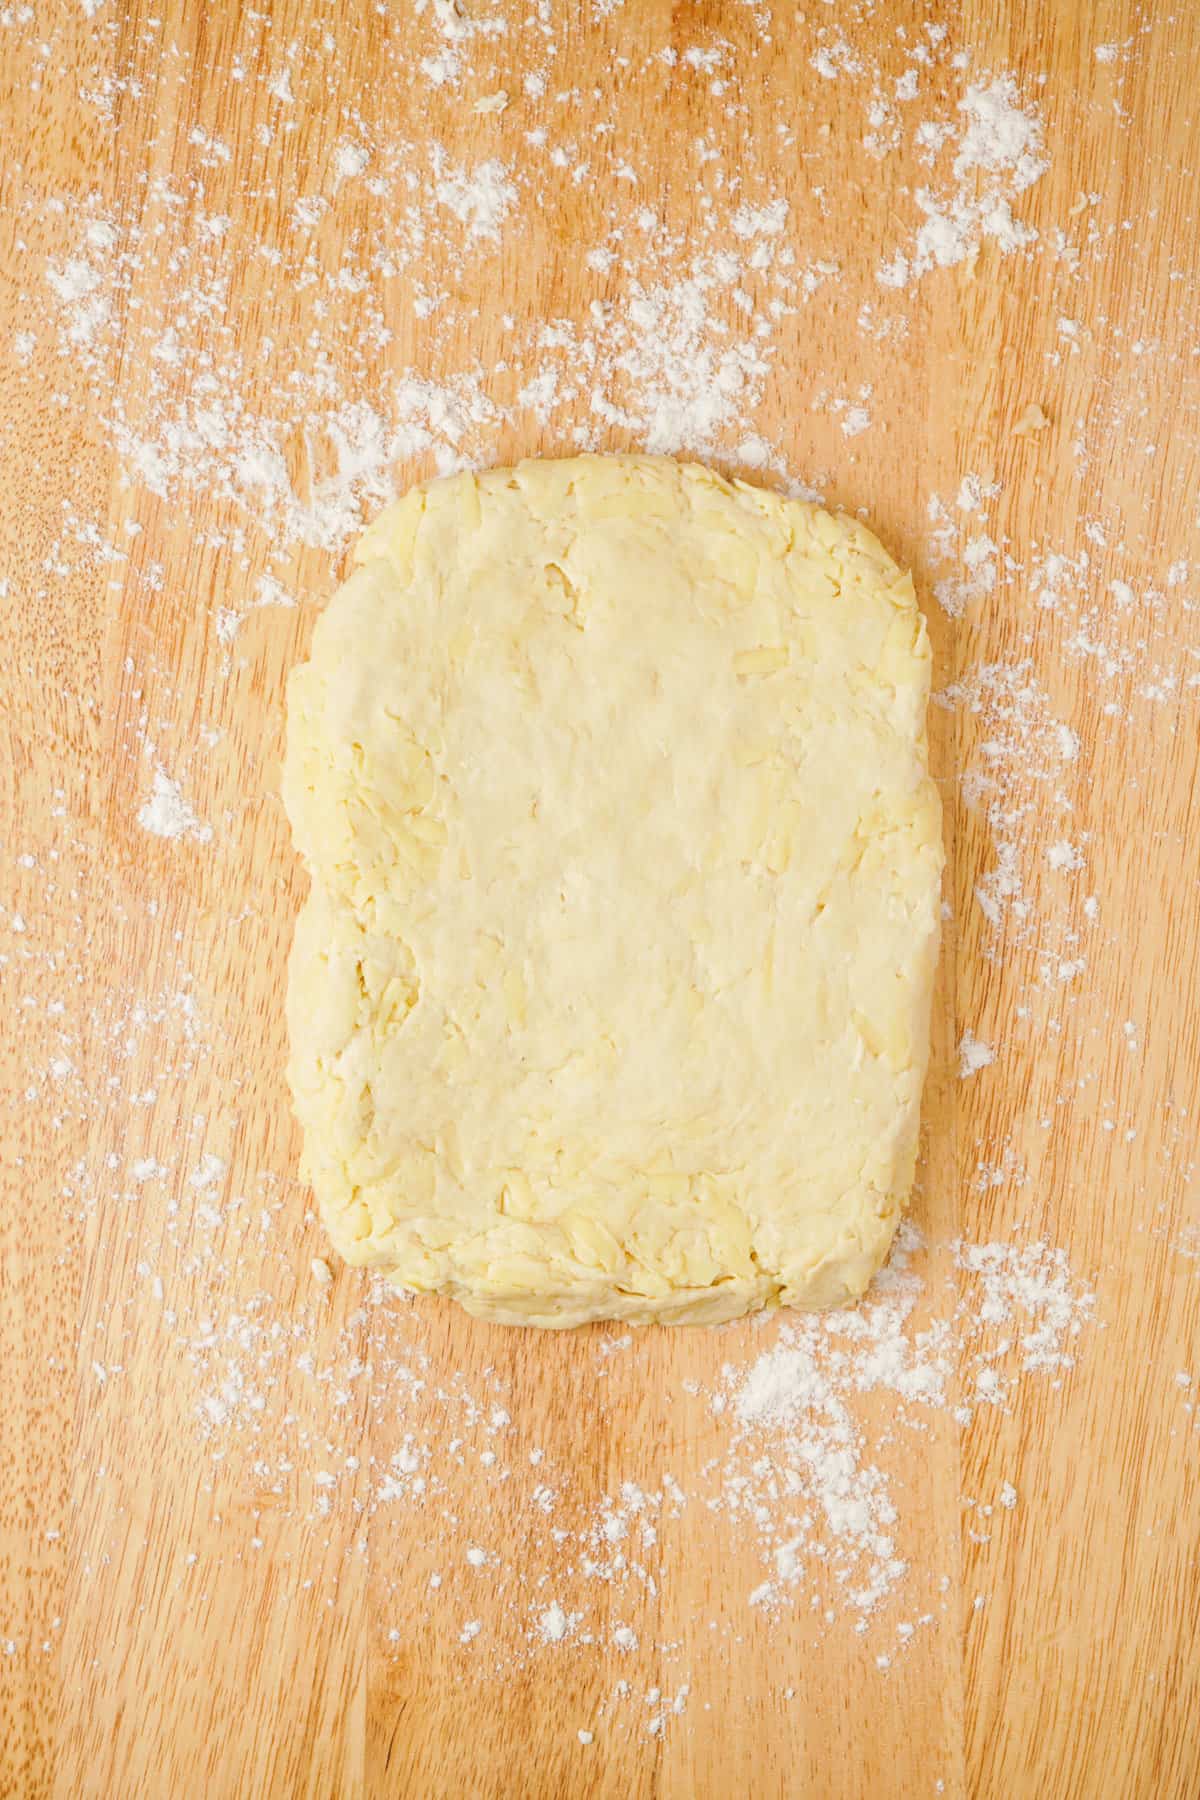 Overhead view showing dough flattened on a wooden cutting board.